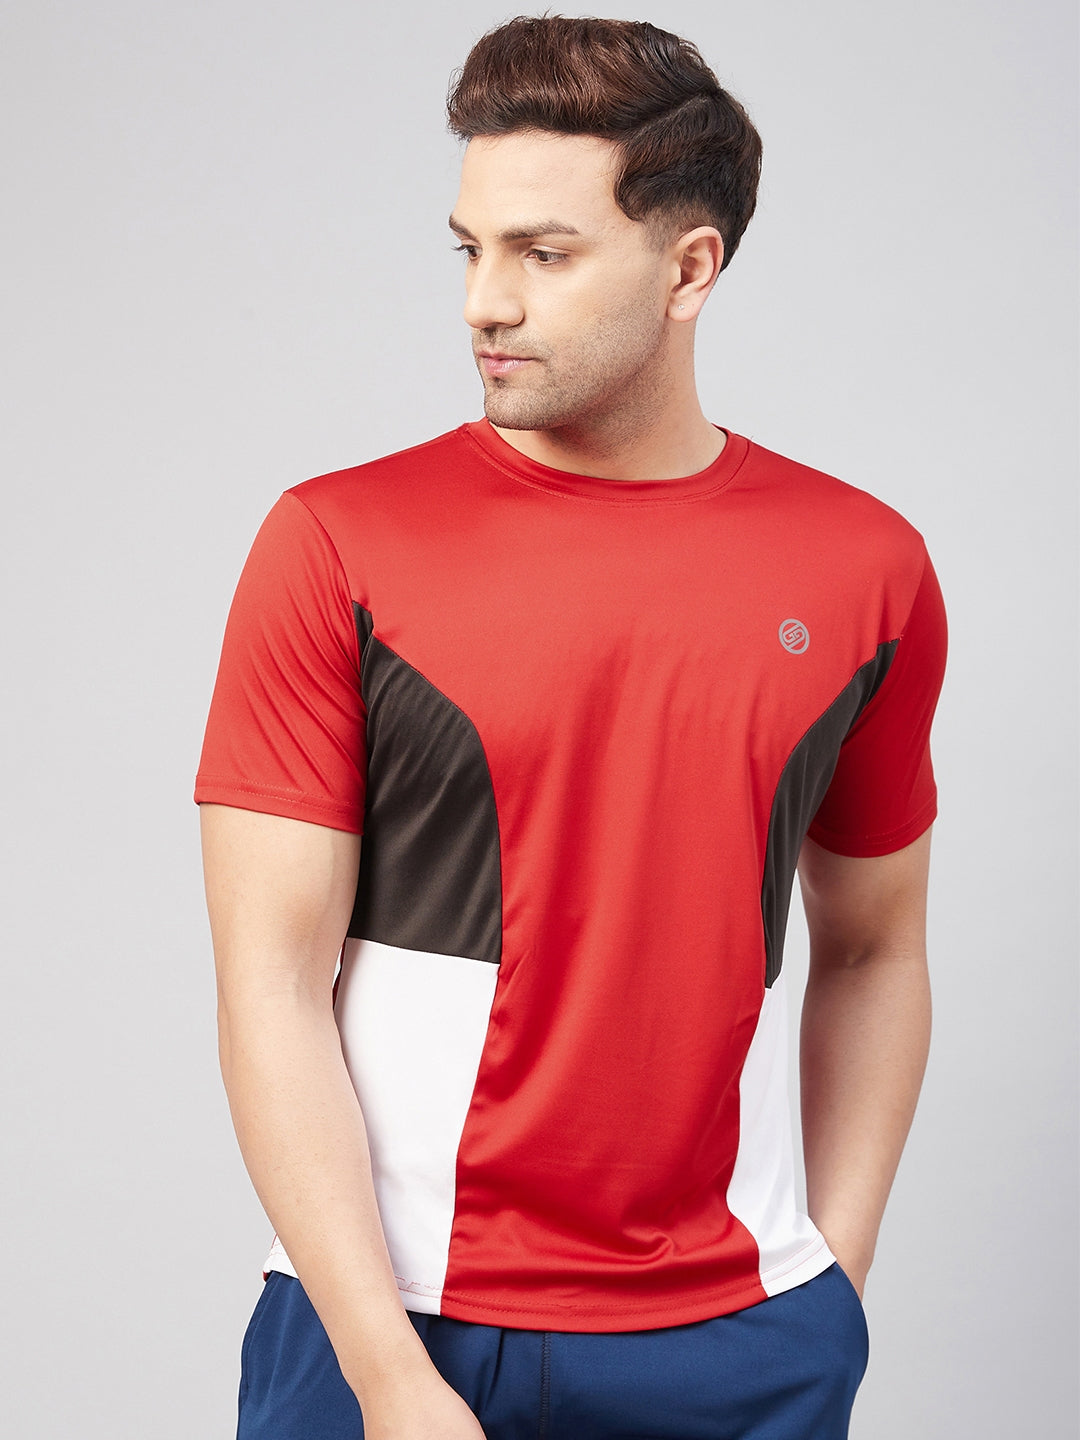 ACTIVE RAPID DRY FIT COLORBLOCK TSHIRT